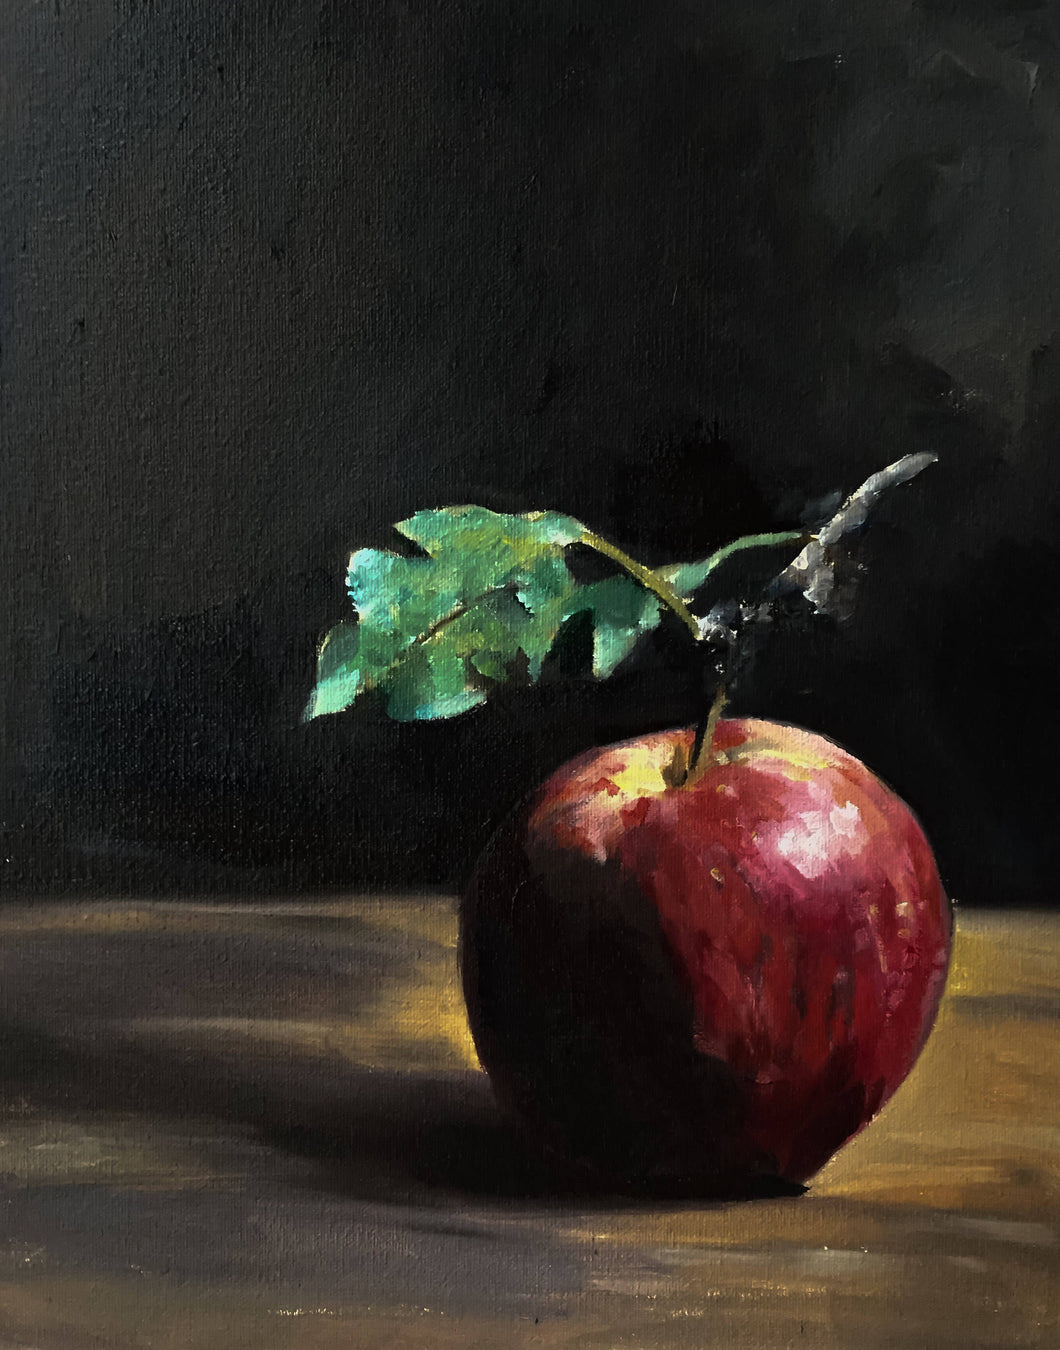 Fruit Painting - Still life art - Canvas and Paper Prints - Fine Art from original oil painting by James Coates